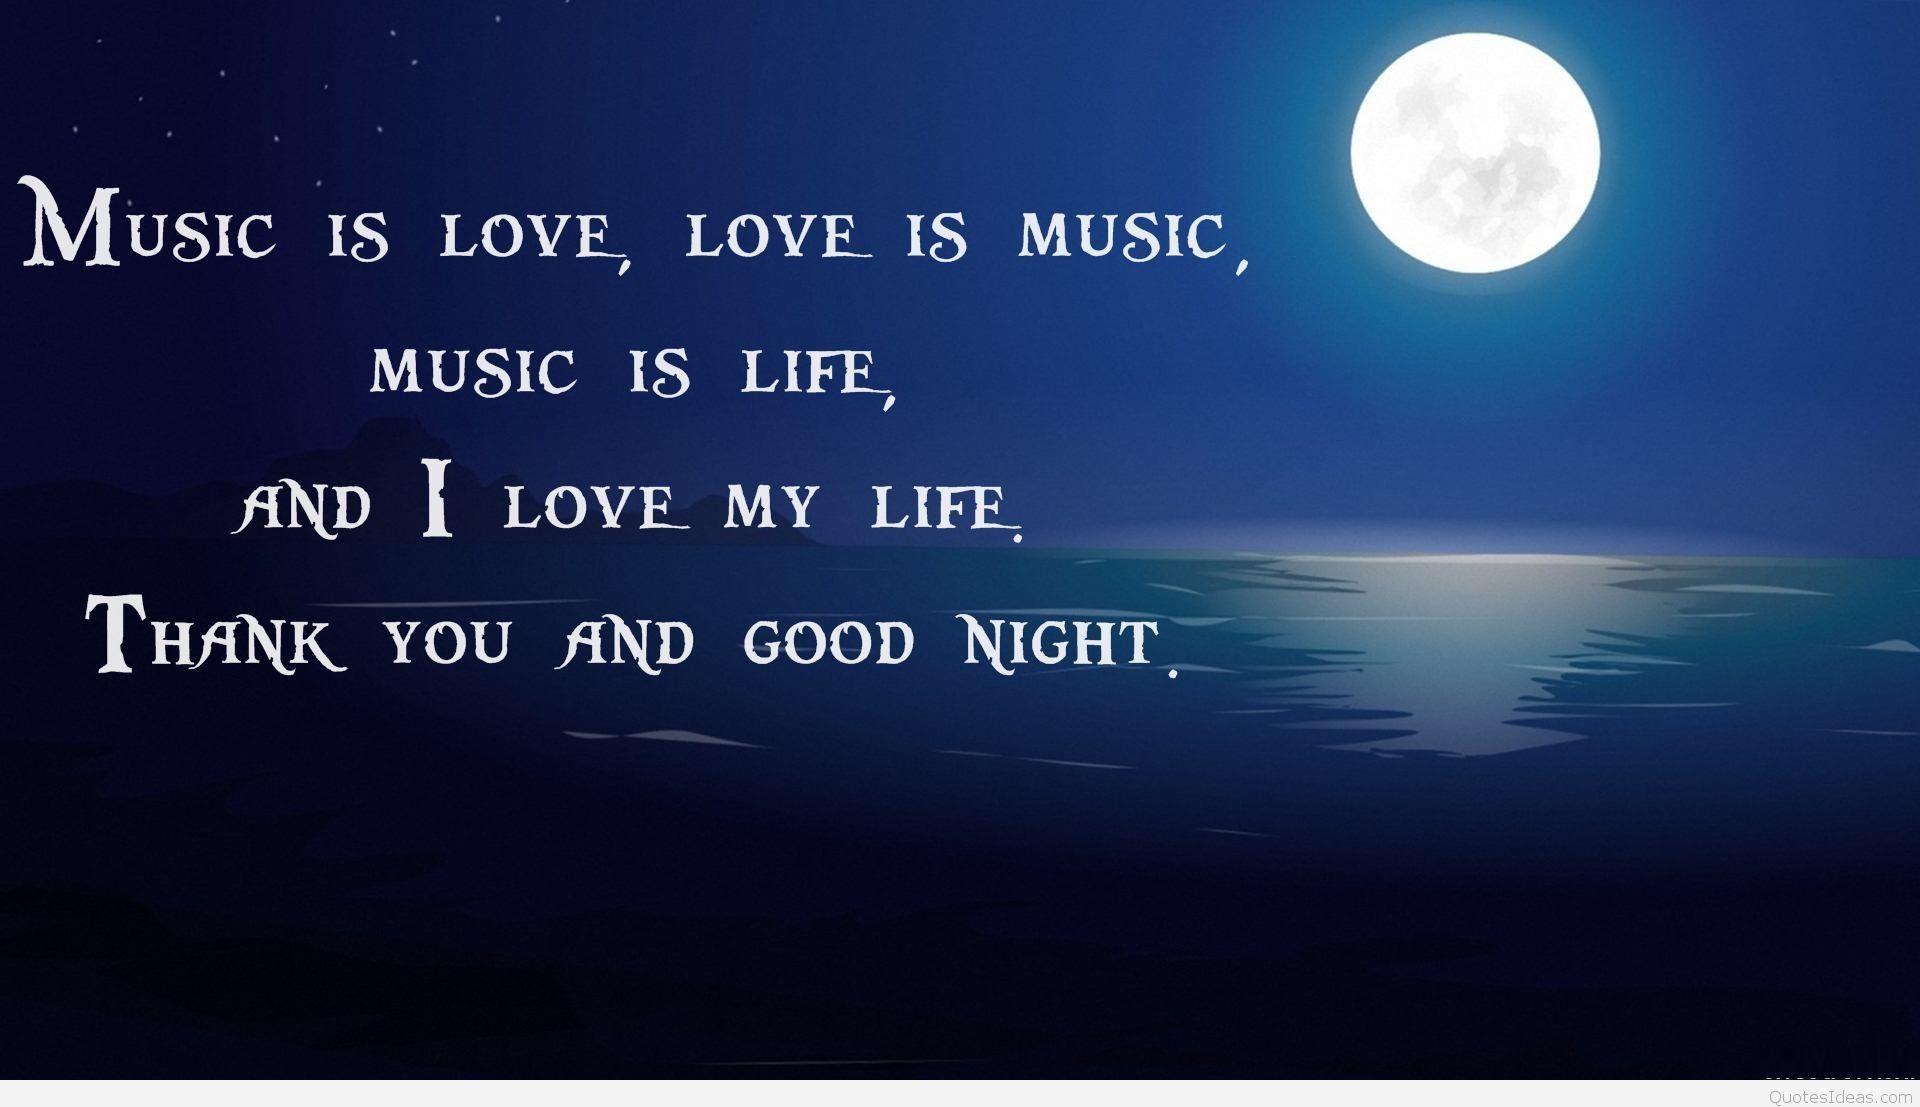 Good night quotes wallpaper, sweet dreams messages sayings